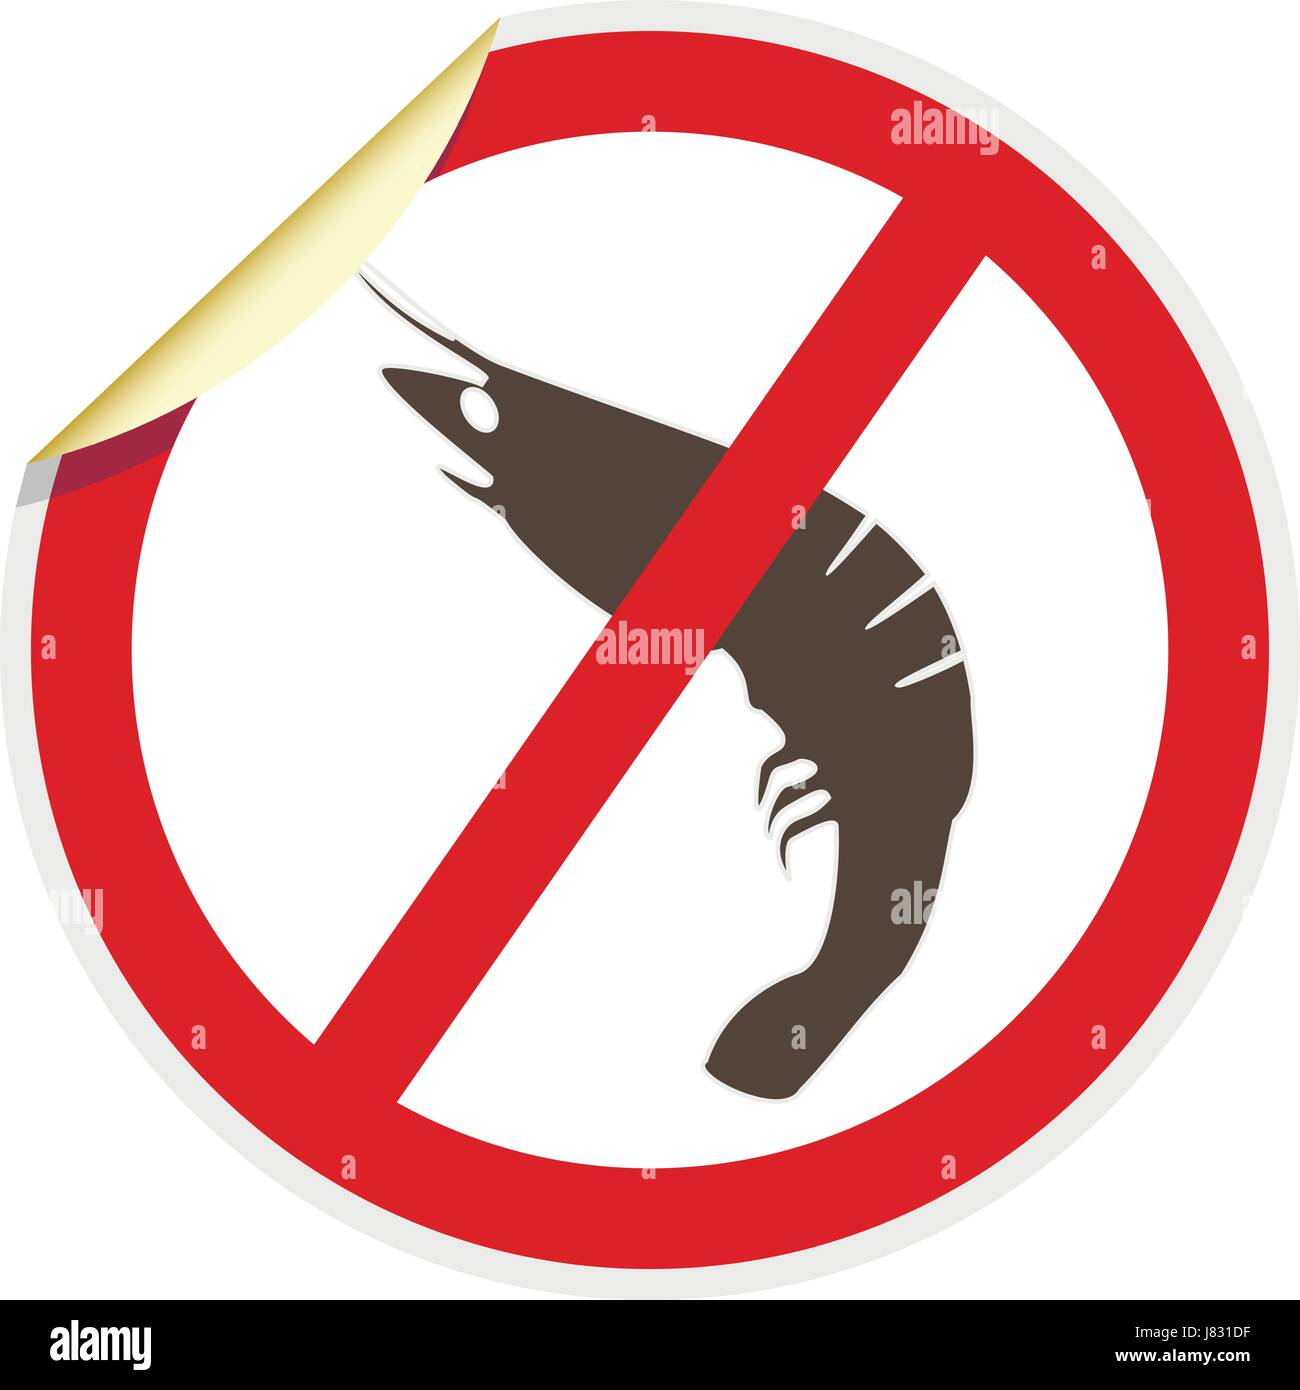 Shellfish free icon in 3D style for food allergy concept Stock Vector